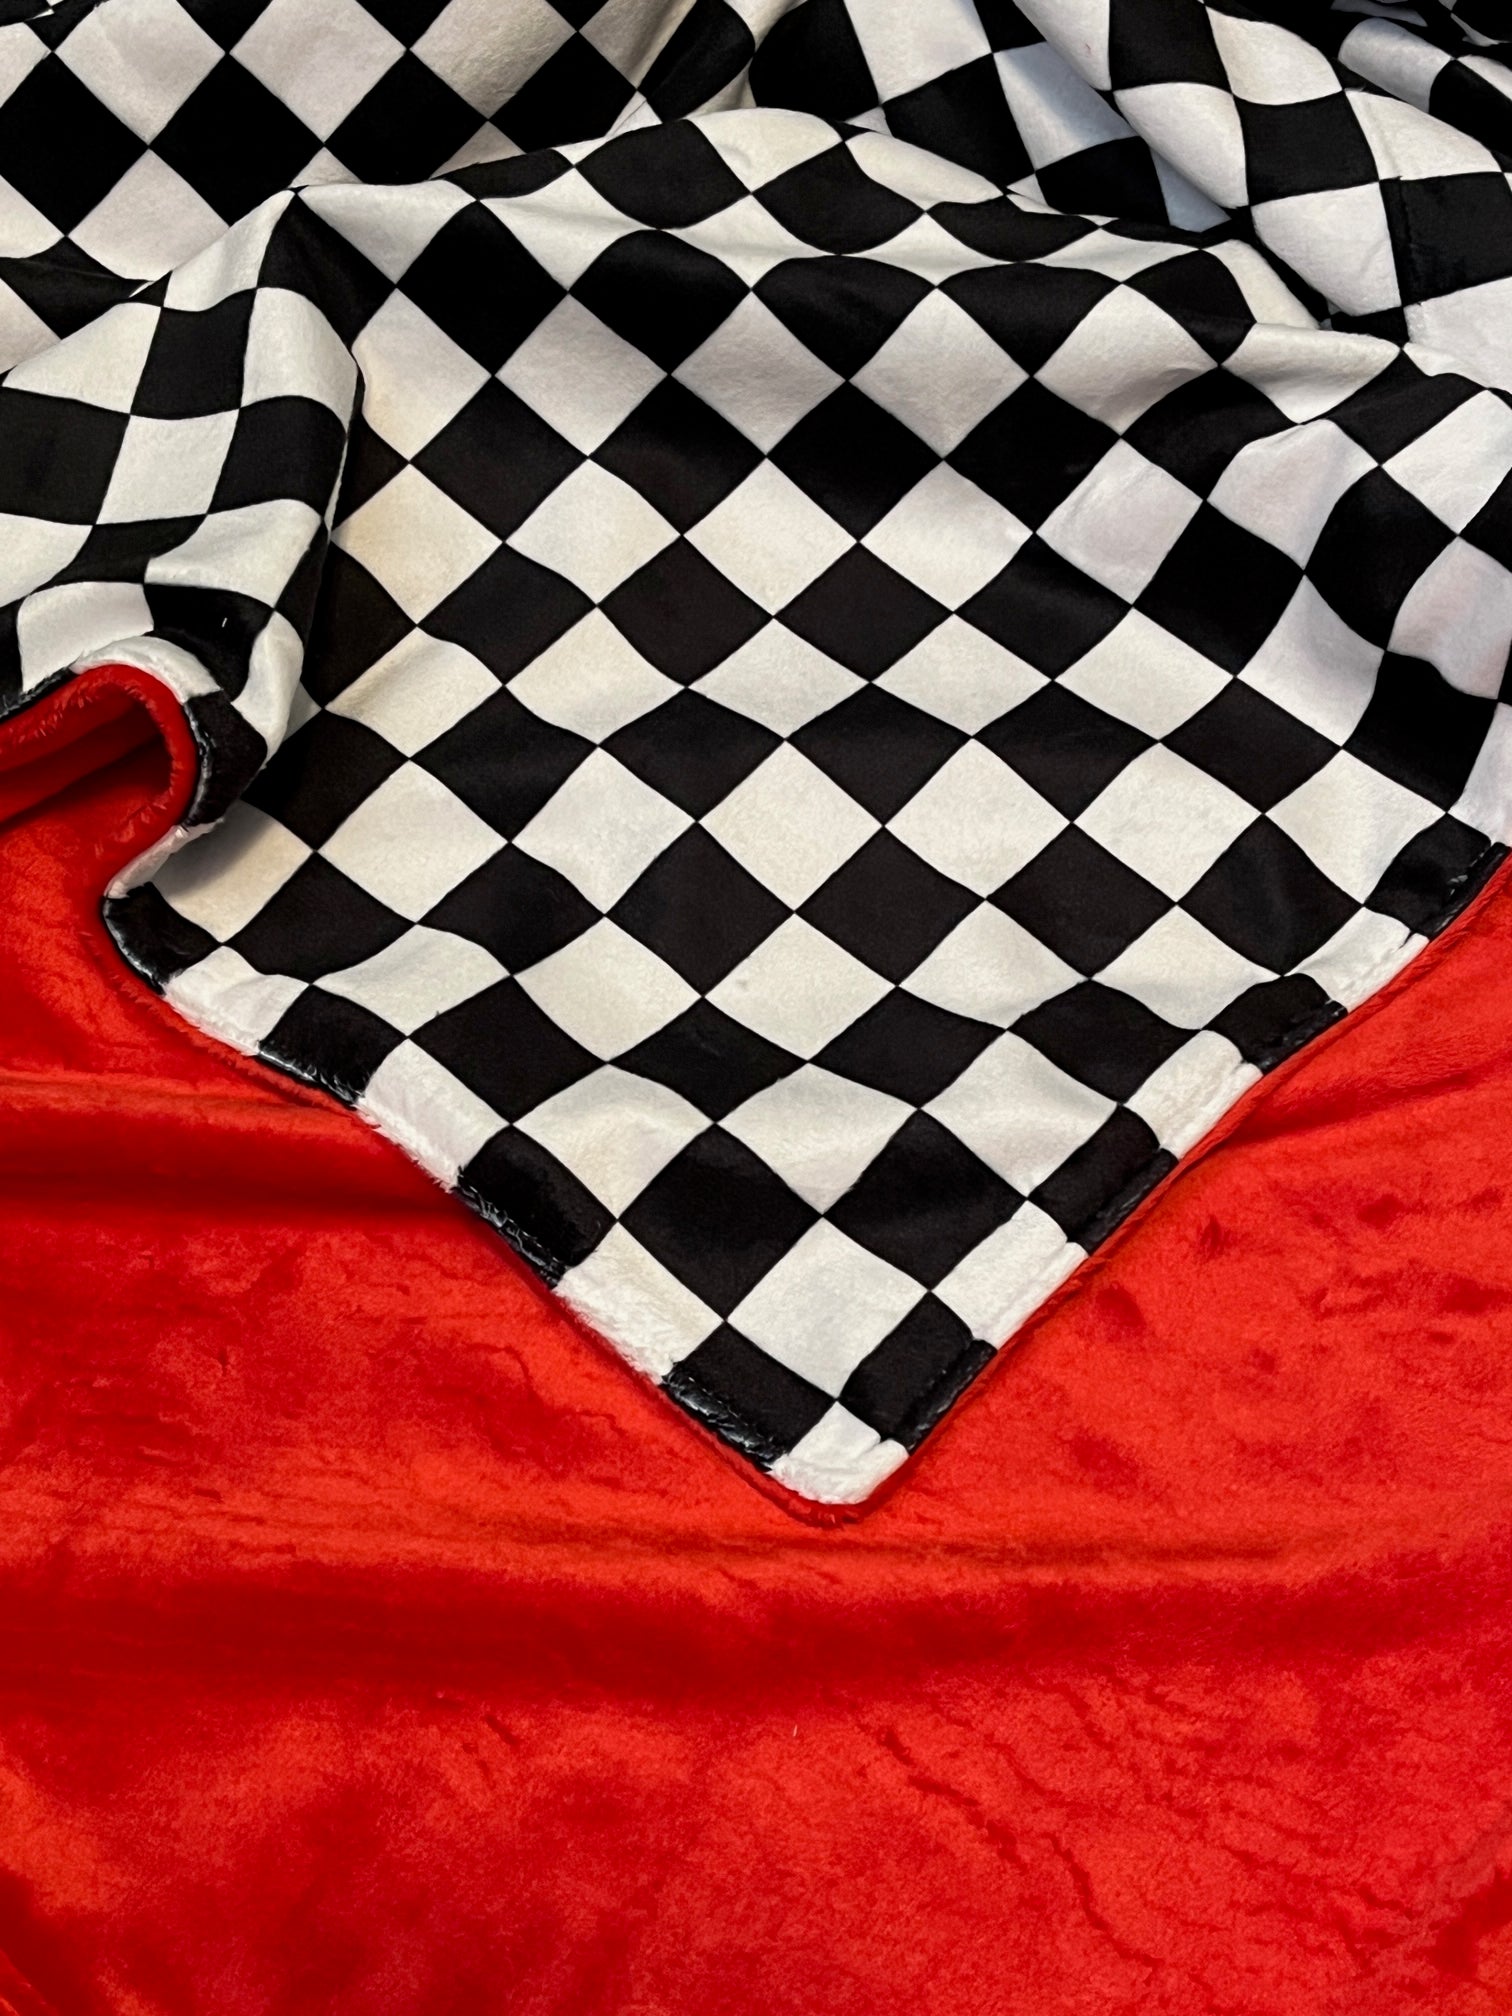 racing check throw blanket shown in red minky